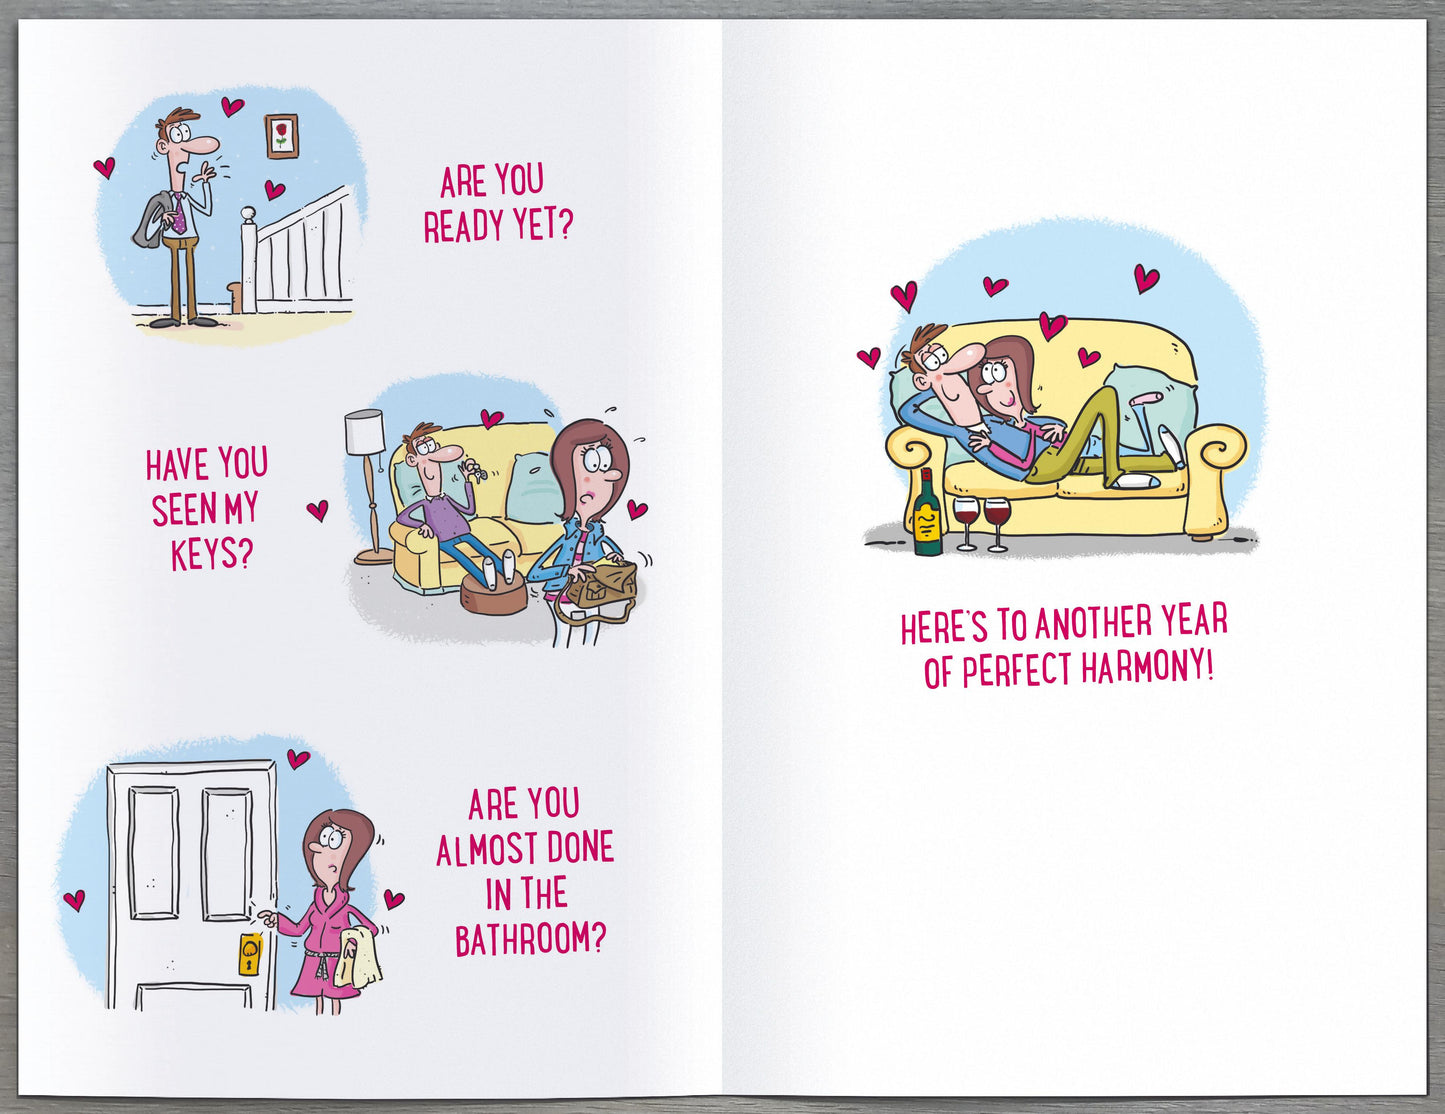 Happy Anniversary Means Many Things Funny Greeting Card